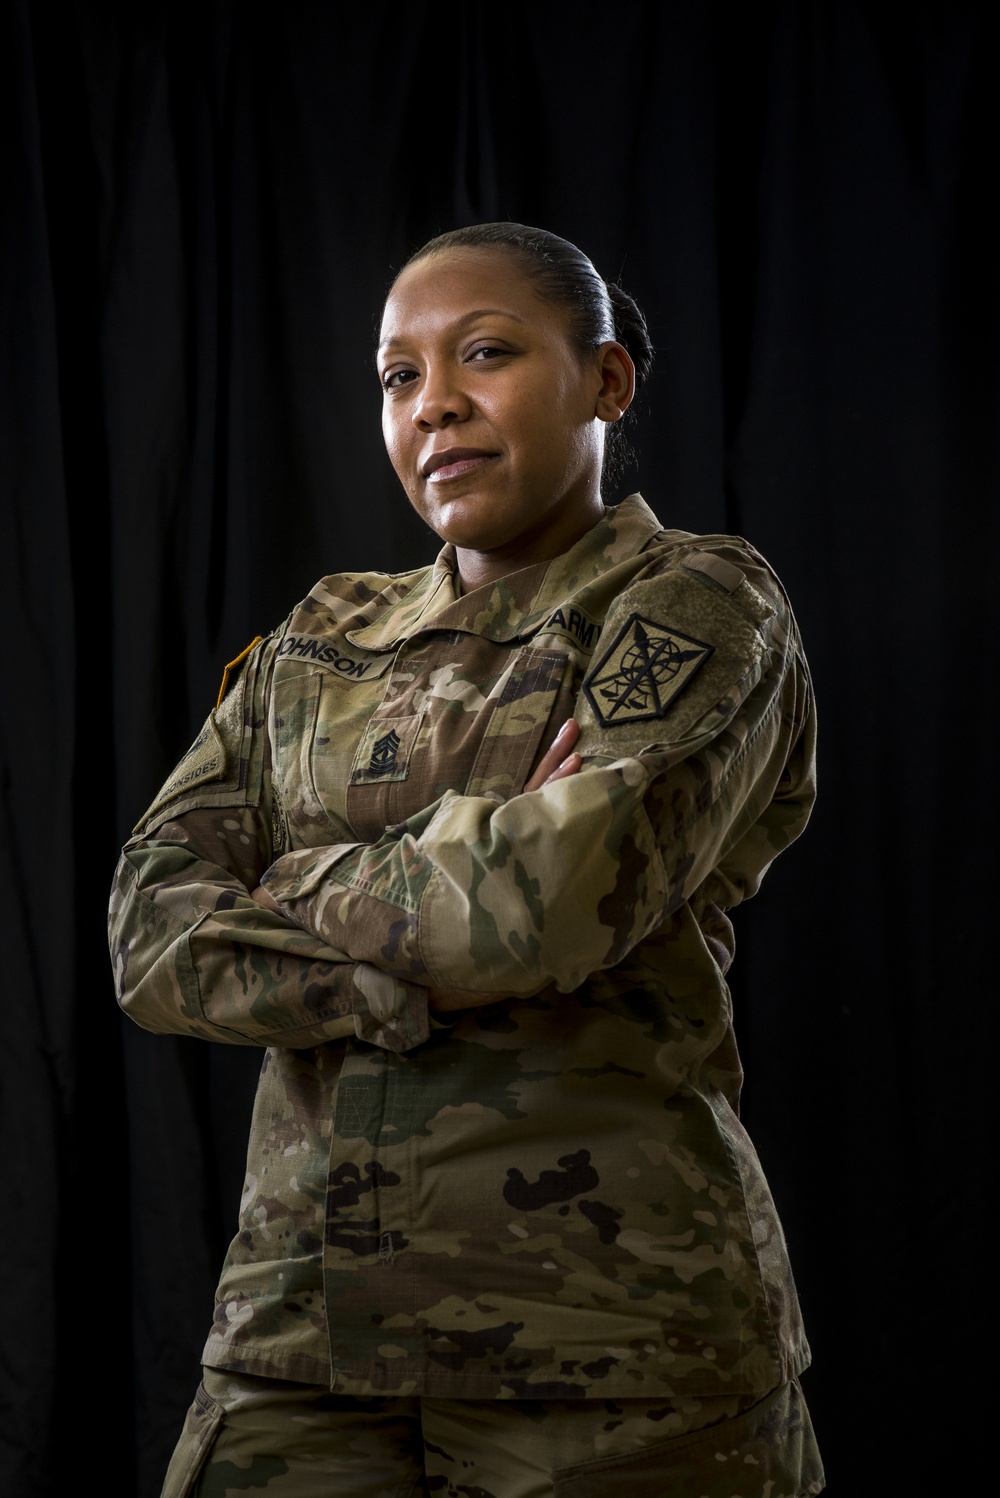 DVIDS - Images - Women of the Army Tribe [Image 3 of 8]